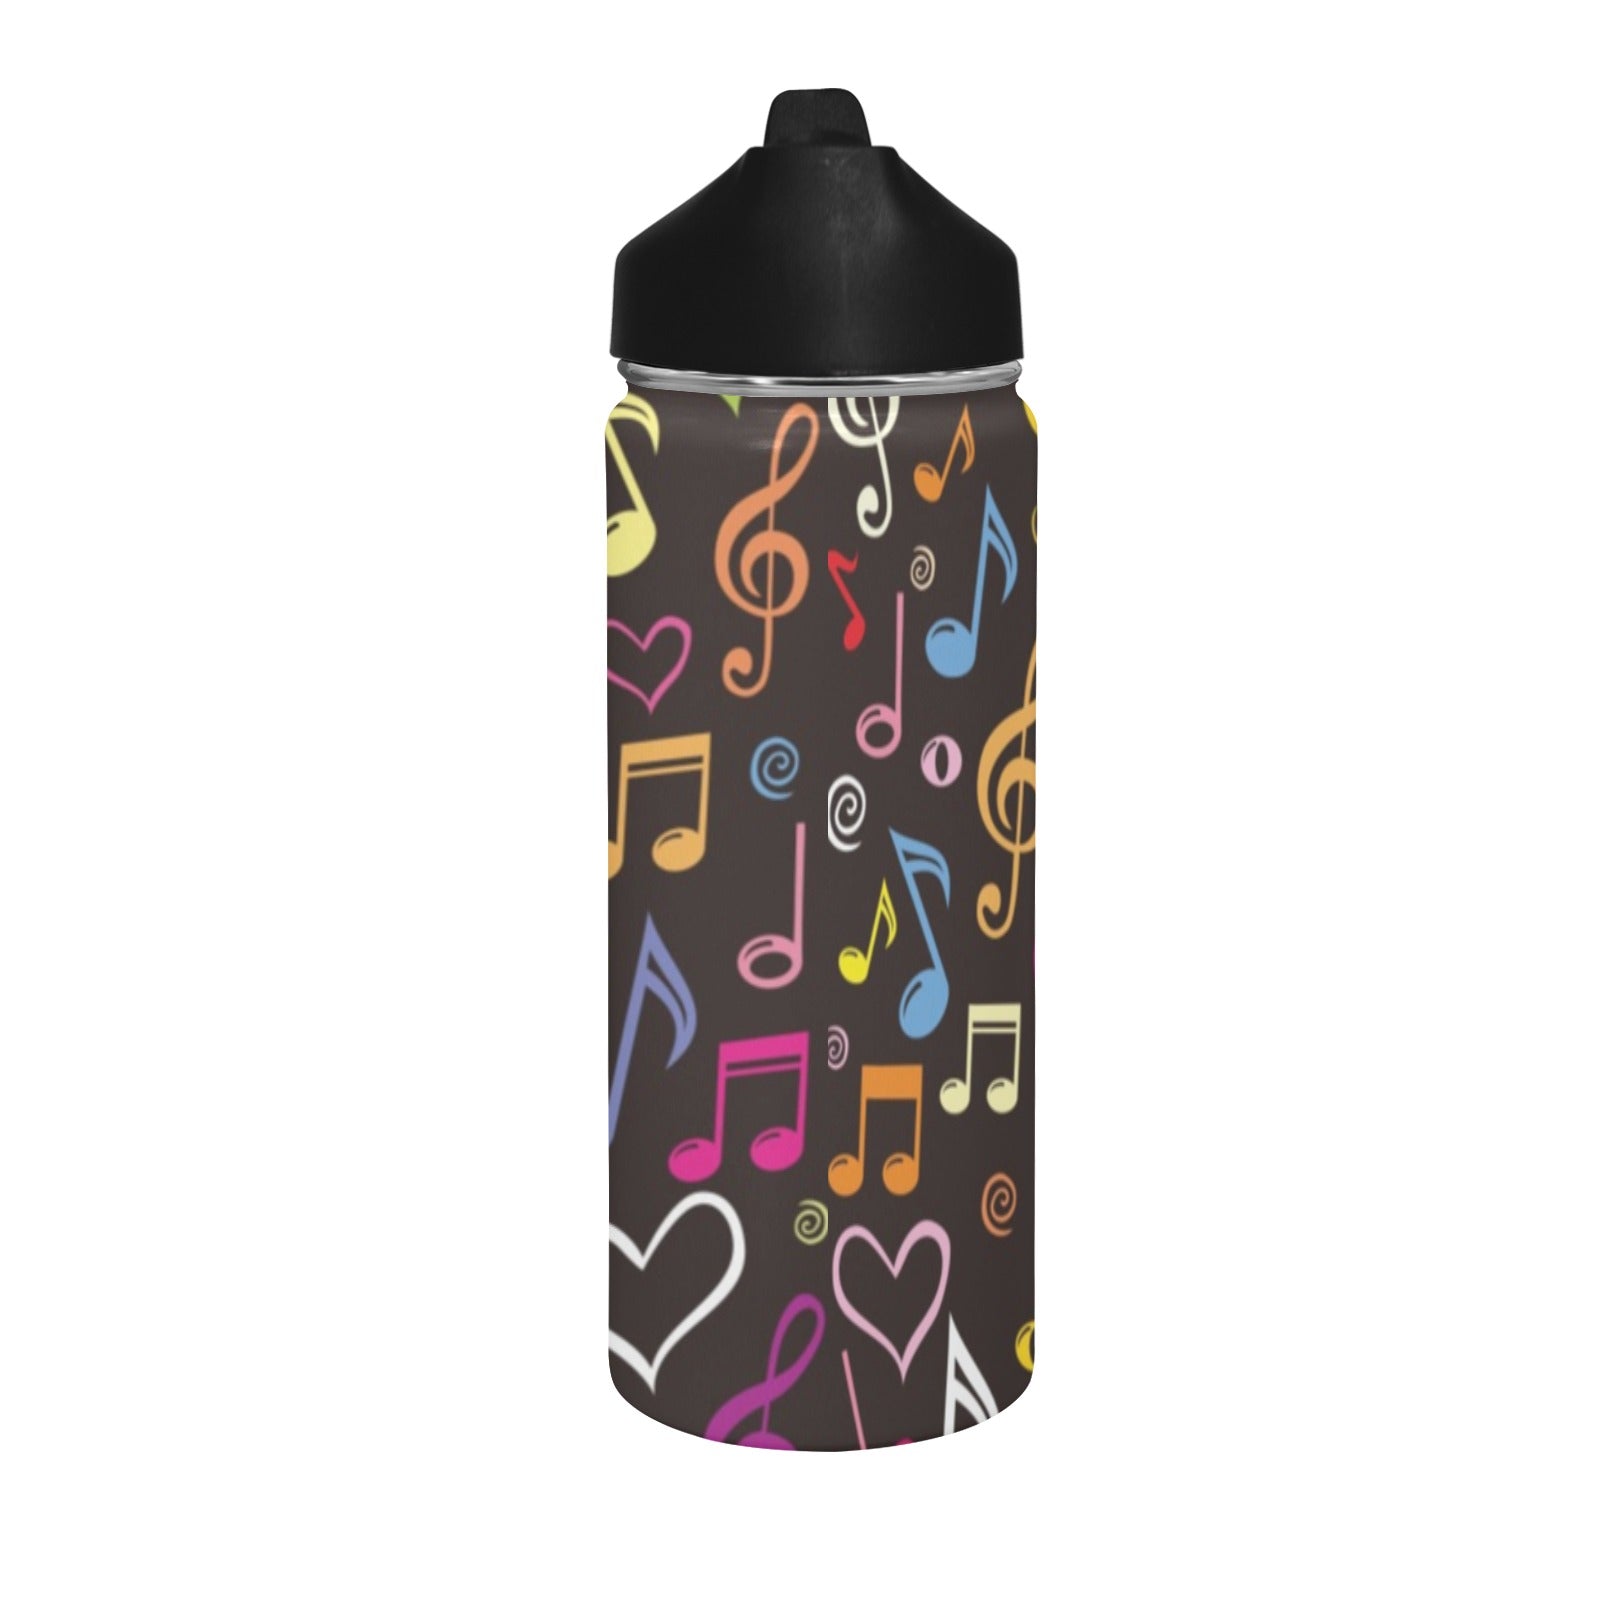 Musical Notes Insulated Water Bottle with Straw Lid (18 oz) Insulated Water Bottle with Straw Lid